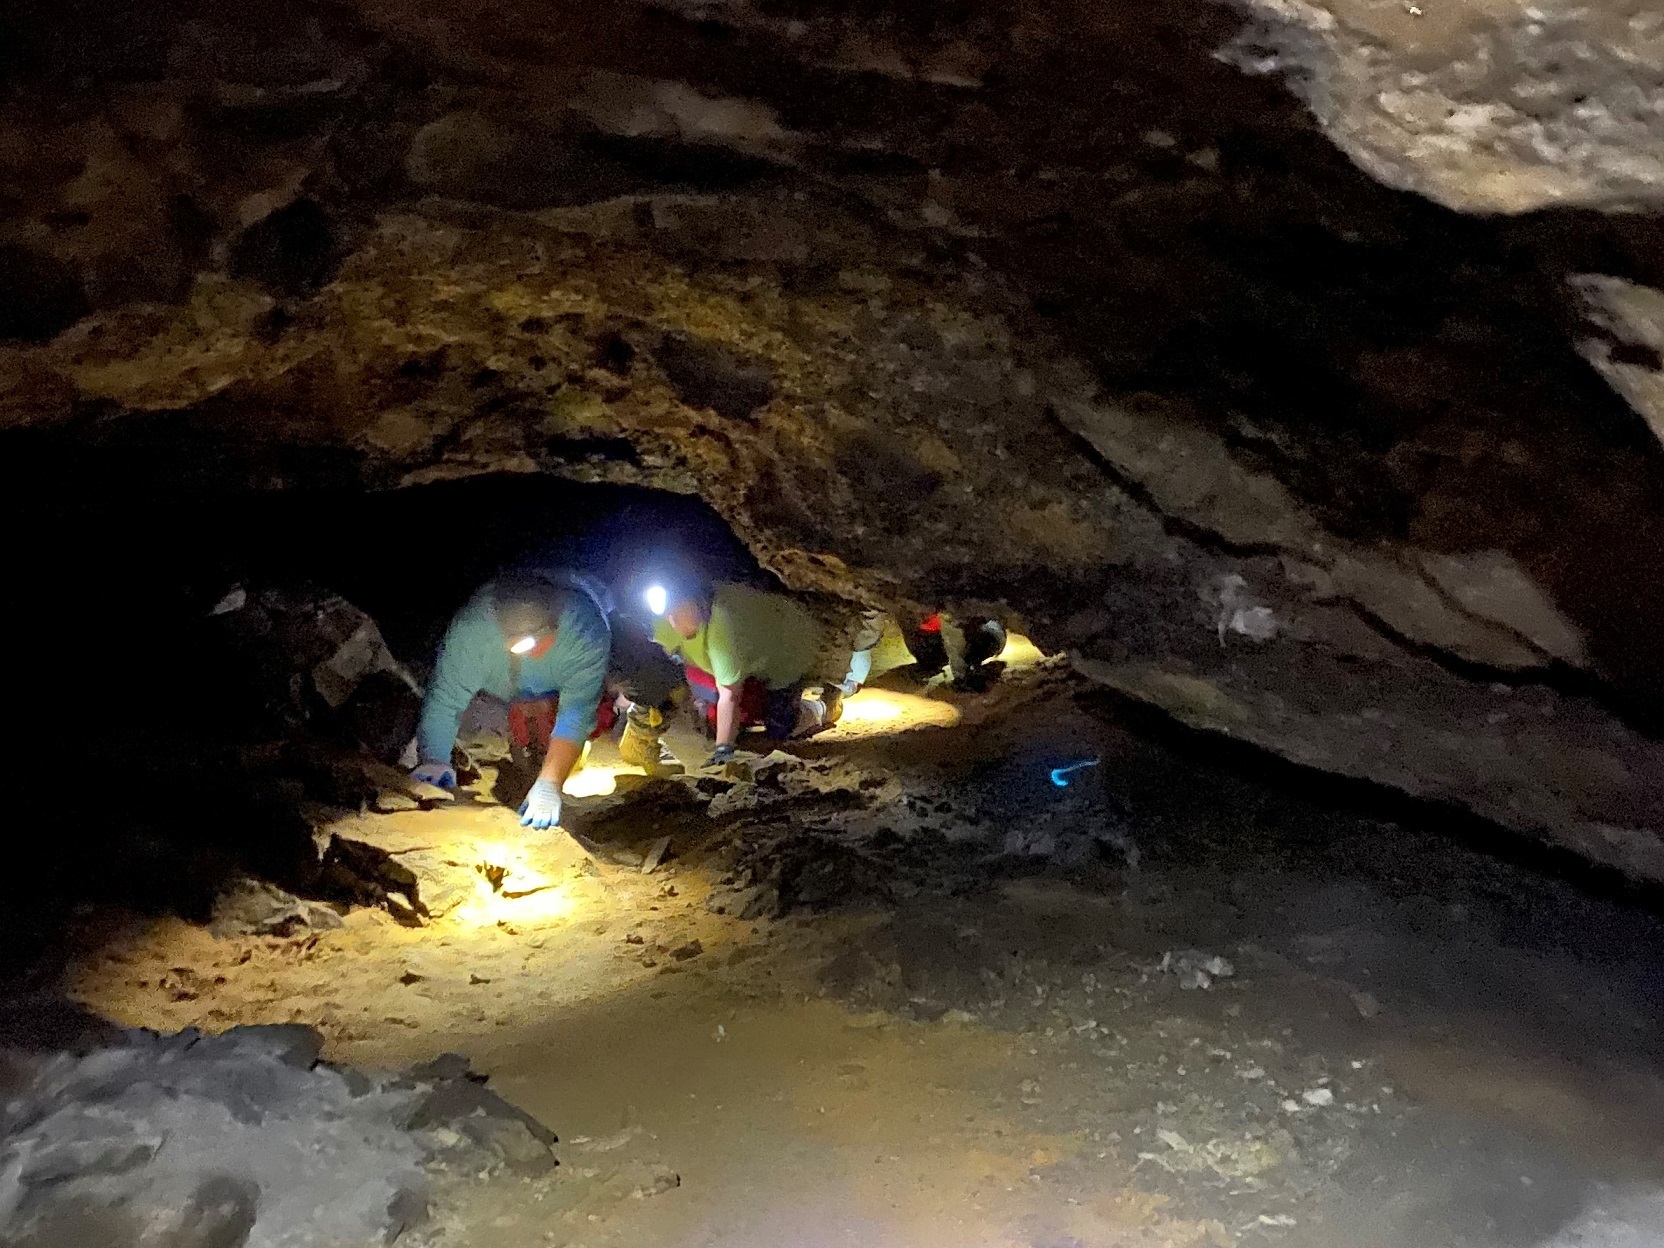 People crawl on their hands and knees through the dirt in a small rocky cave passageway.